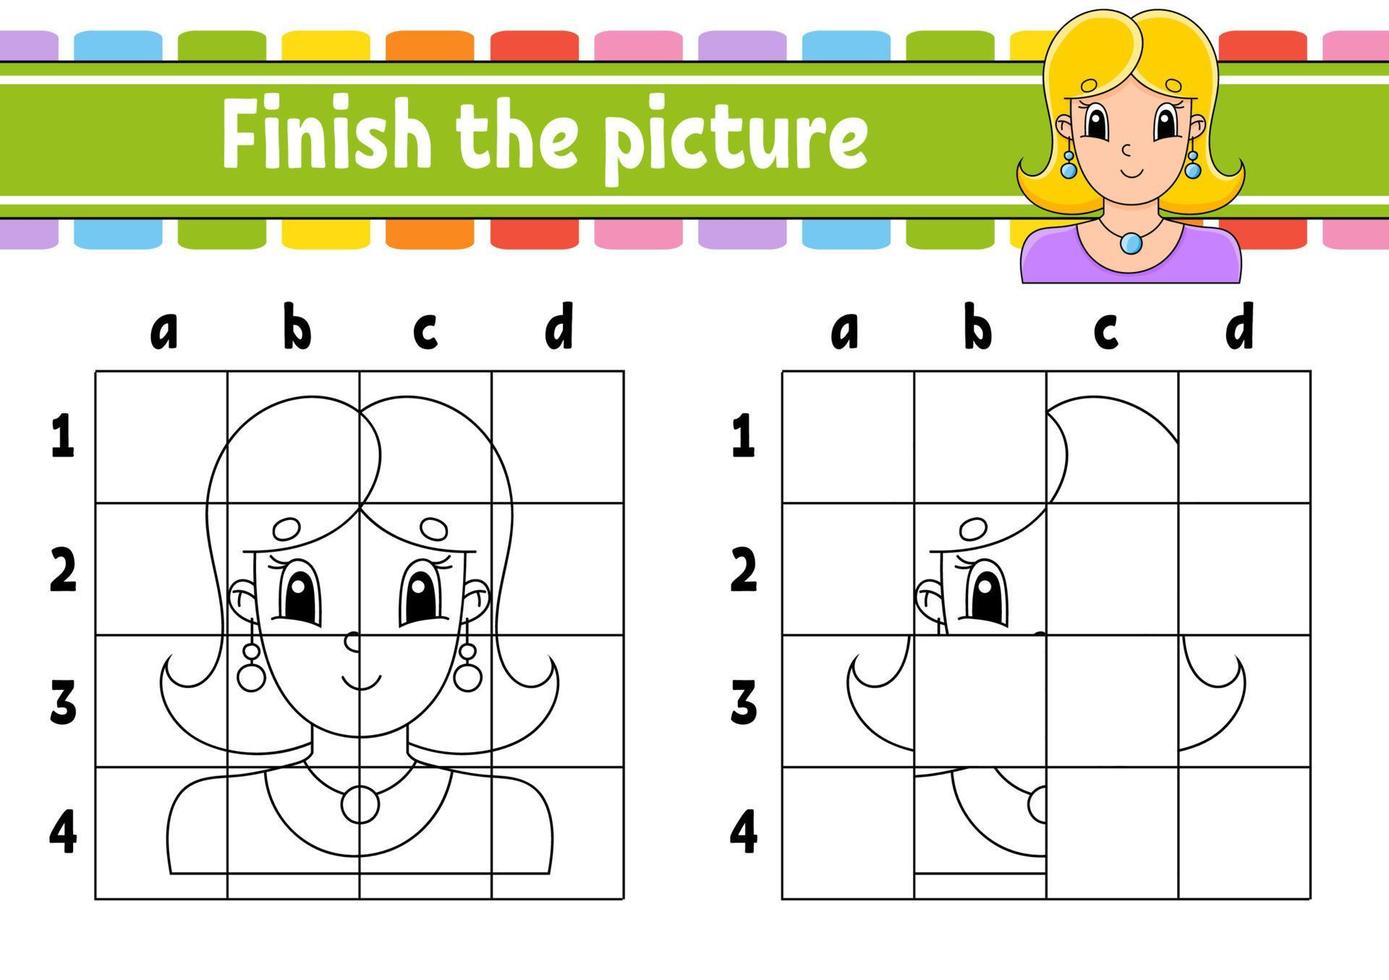 Finish the picture. Coloring book pages for kids. Education developing worksheet. Game for children. Handwriting practice. Cartoon character. Vector illustration.